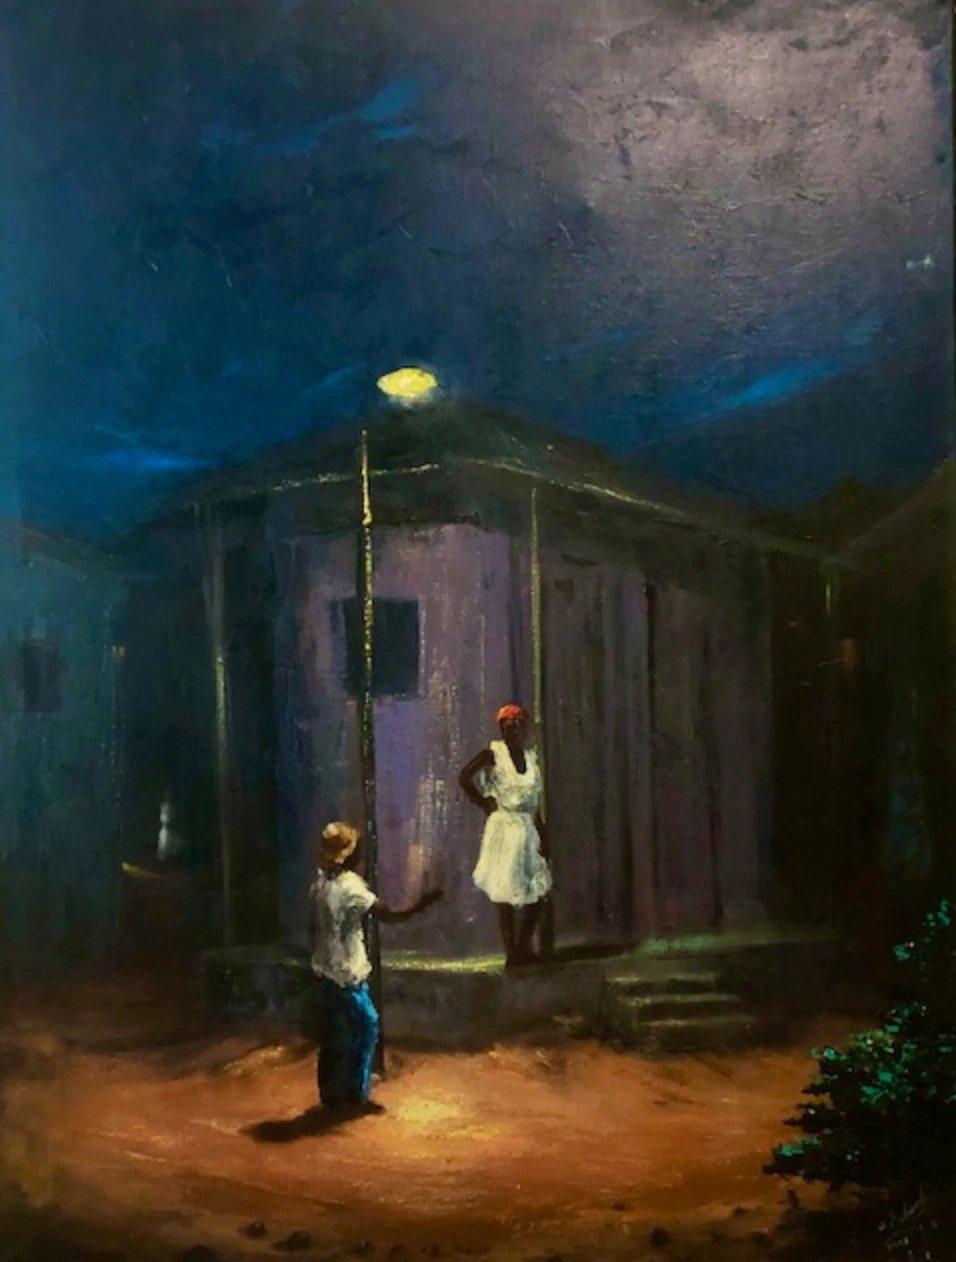 This is an original vintage 36"x24" painting signed by the late Haitian master painter Etzer Charles. It depicts a nocturnal romantic scene. This painting belongs to the private collection of Georges S. Nader.  It is sold as-is. 

Etzer Charles was